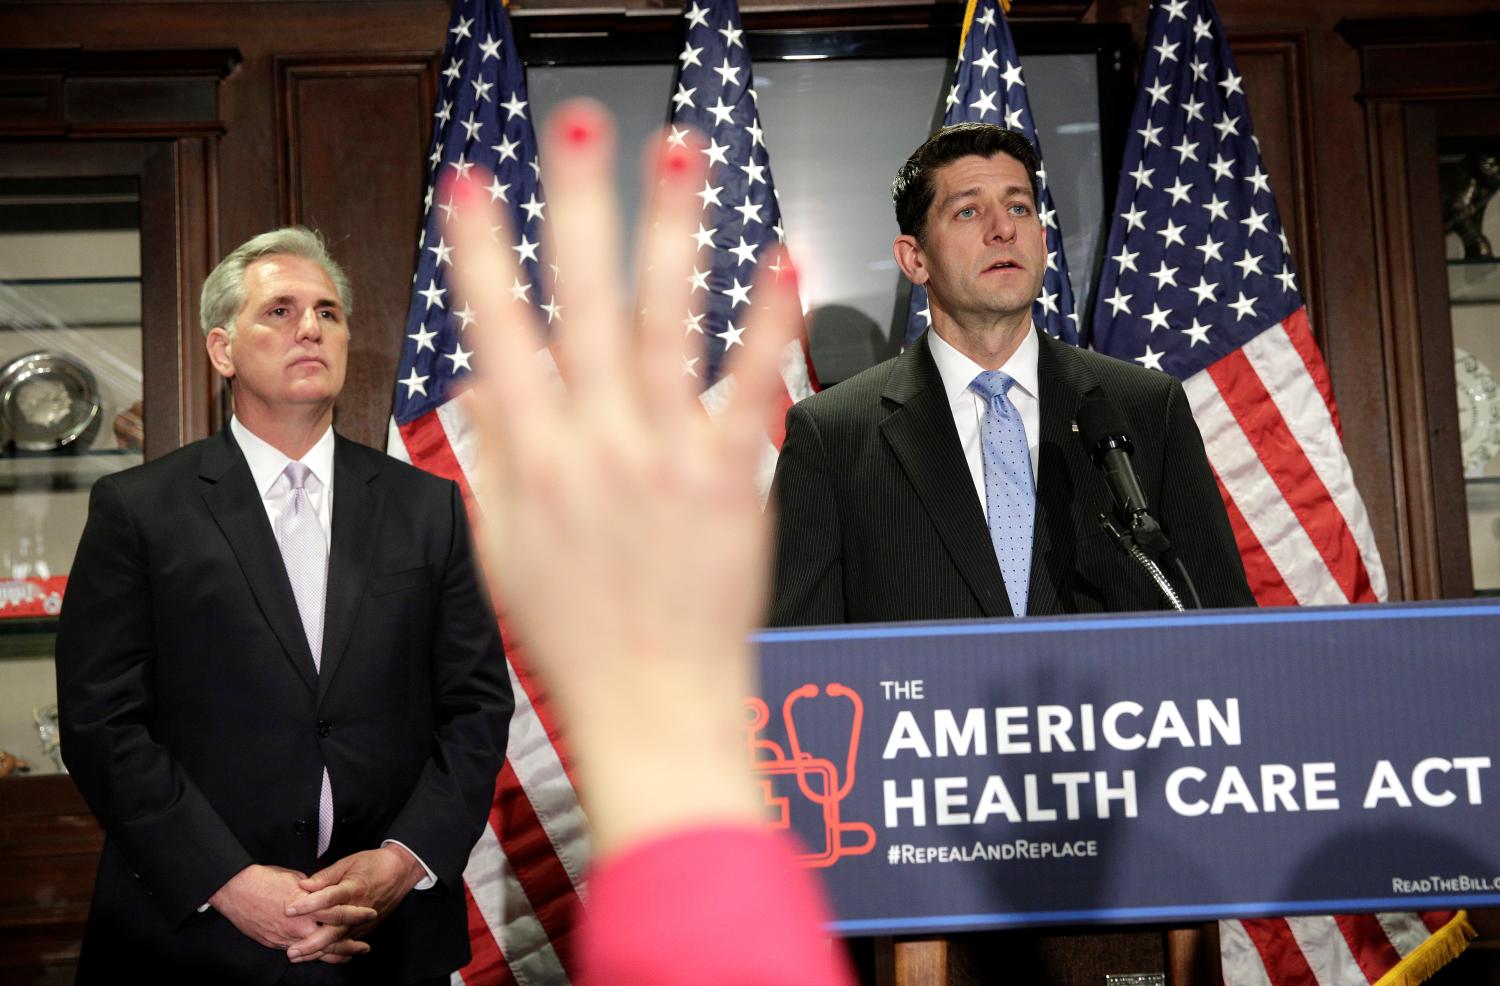 Speaker of the House Paul Ryan (R-WI) and House Majority Leader Kevin McCarthy (R-CA) answer questions about the American Health Care Act, the Republican replacement to Obamacare.